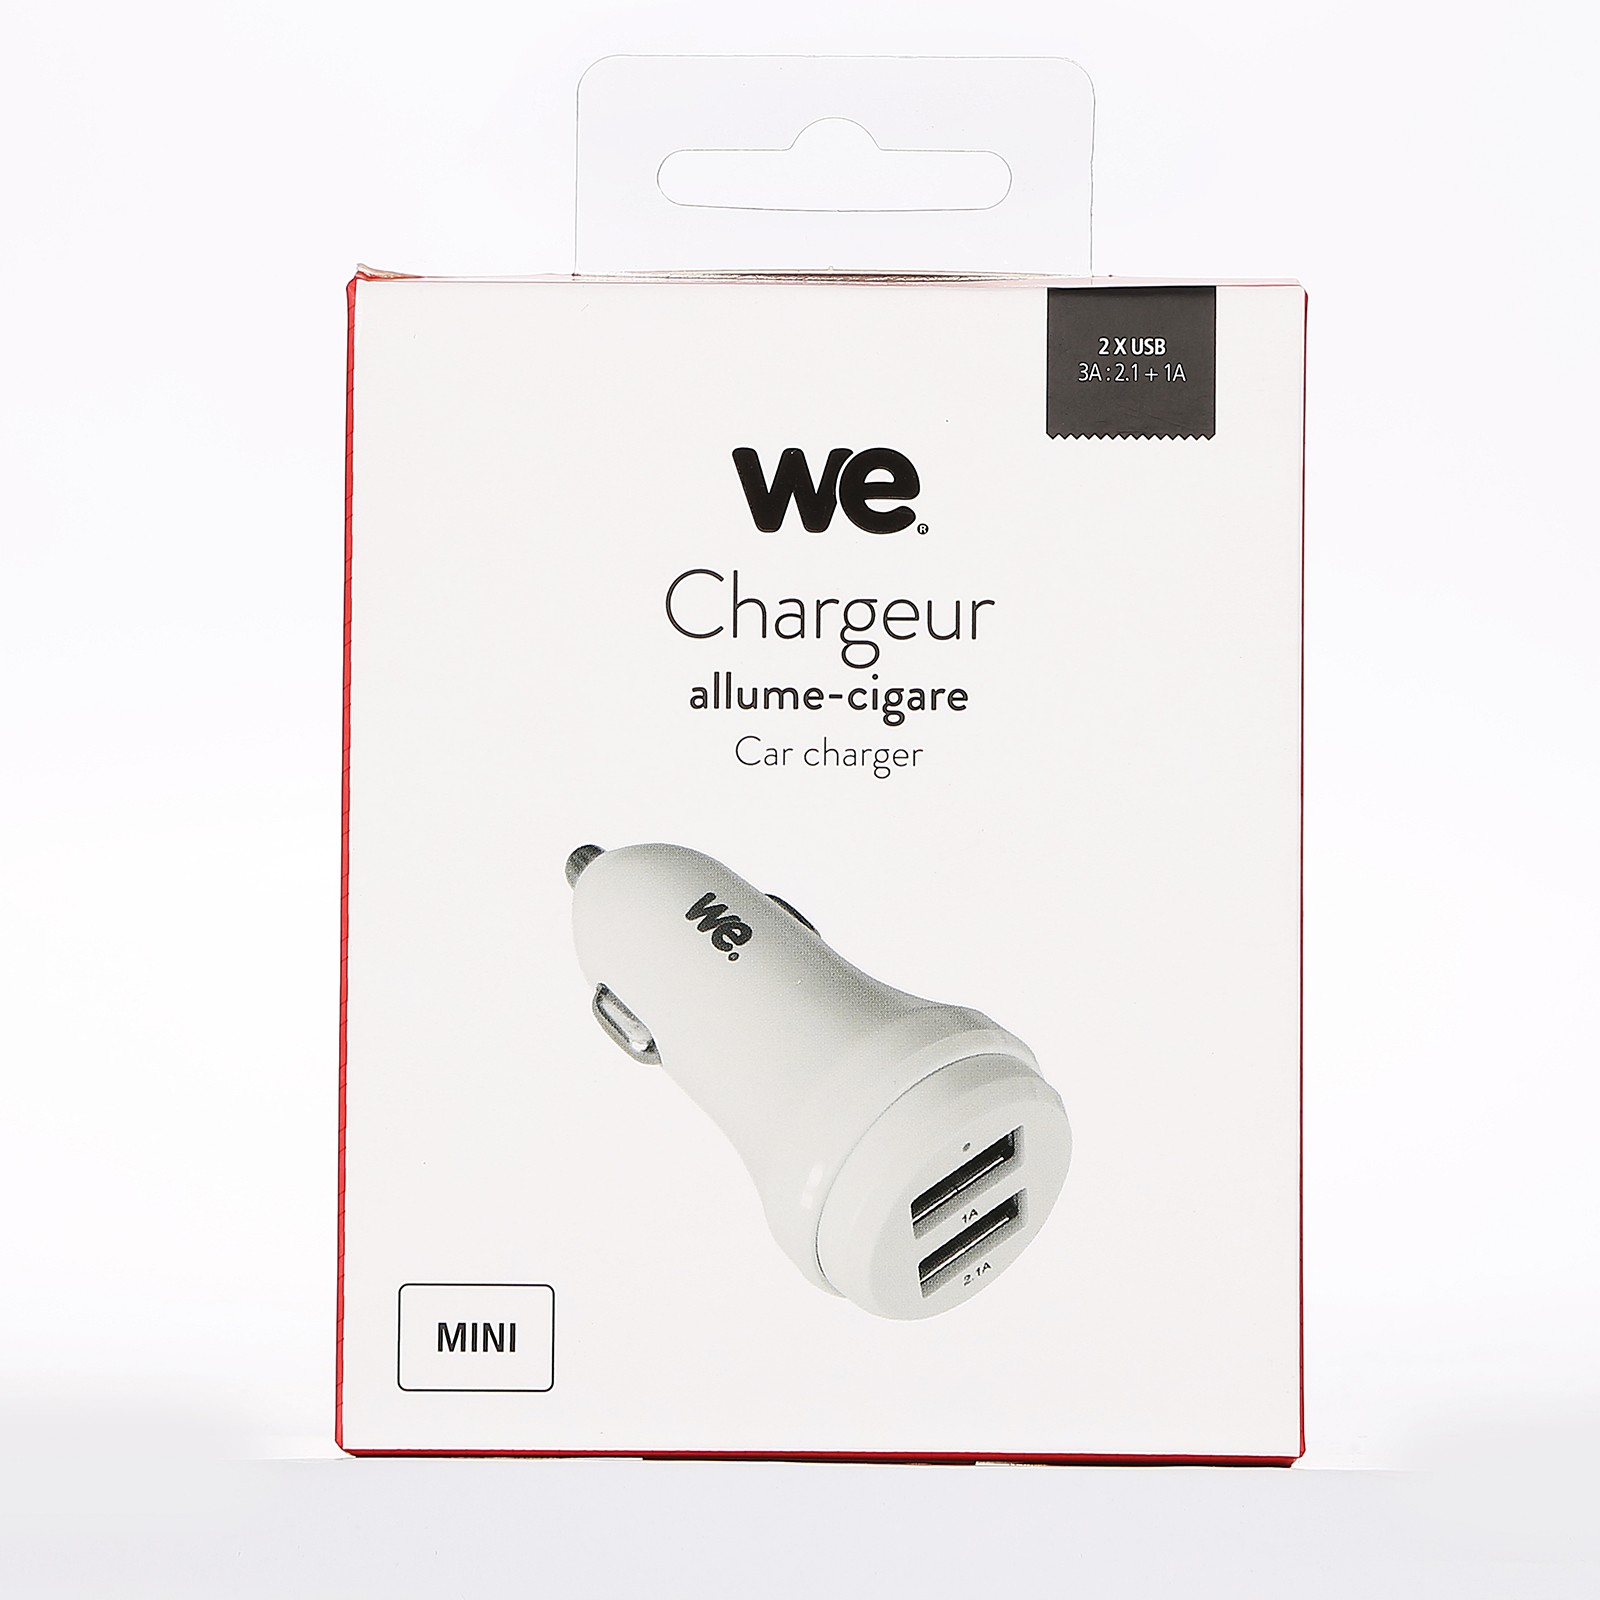 Chargeur allume-cigare 2 USB 2 ports USB 2.1A + 1A blanc - WE